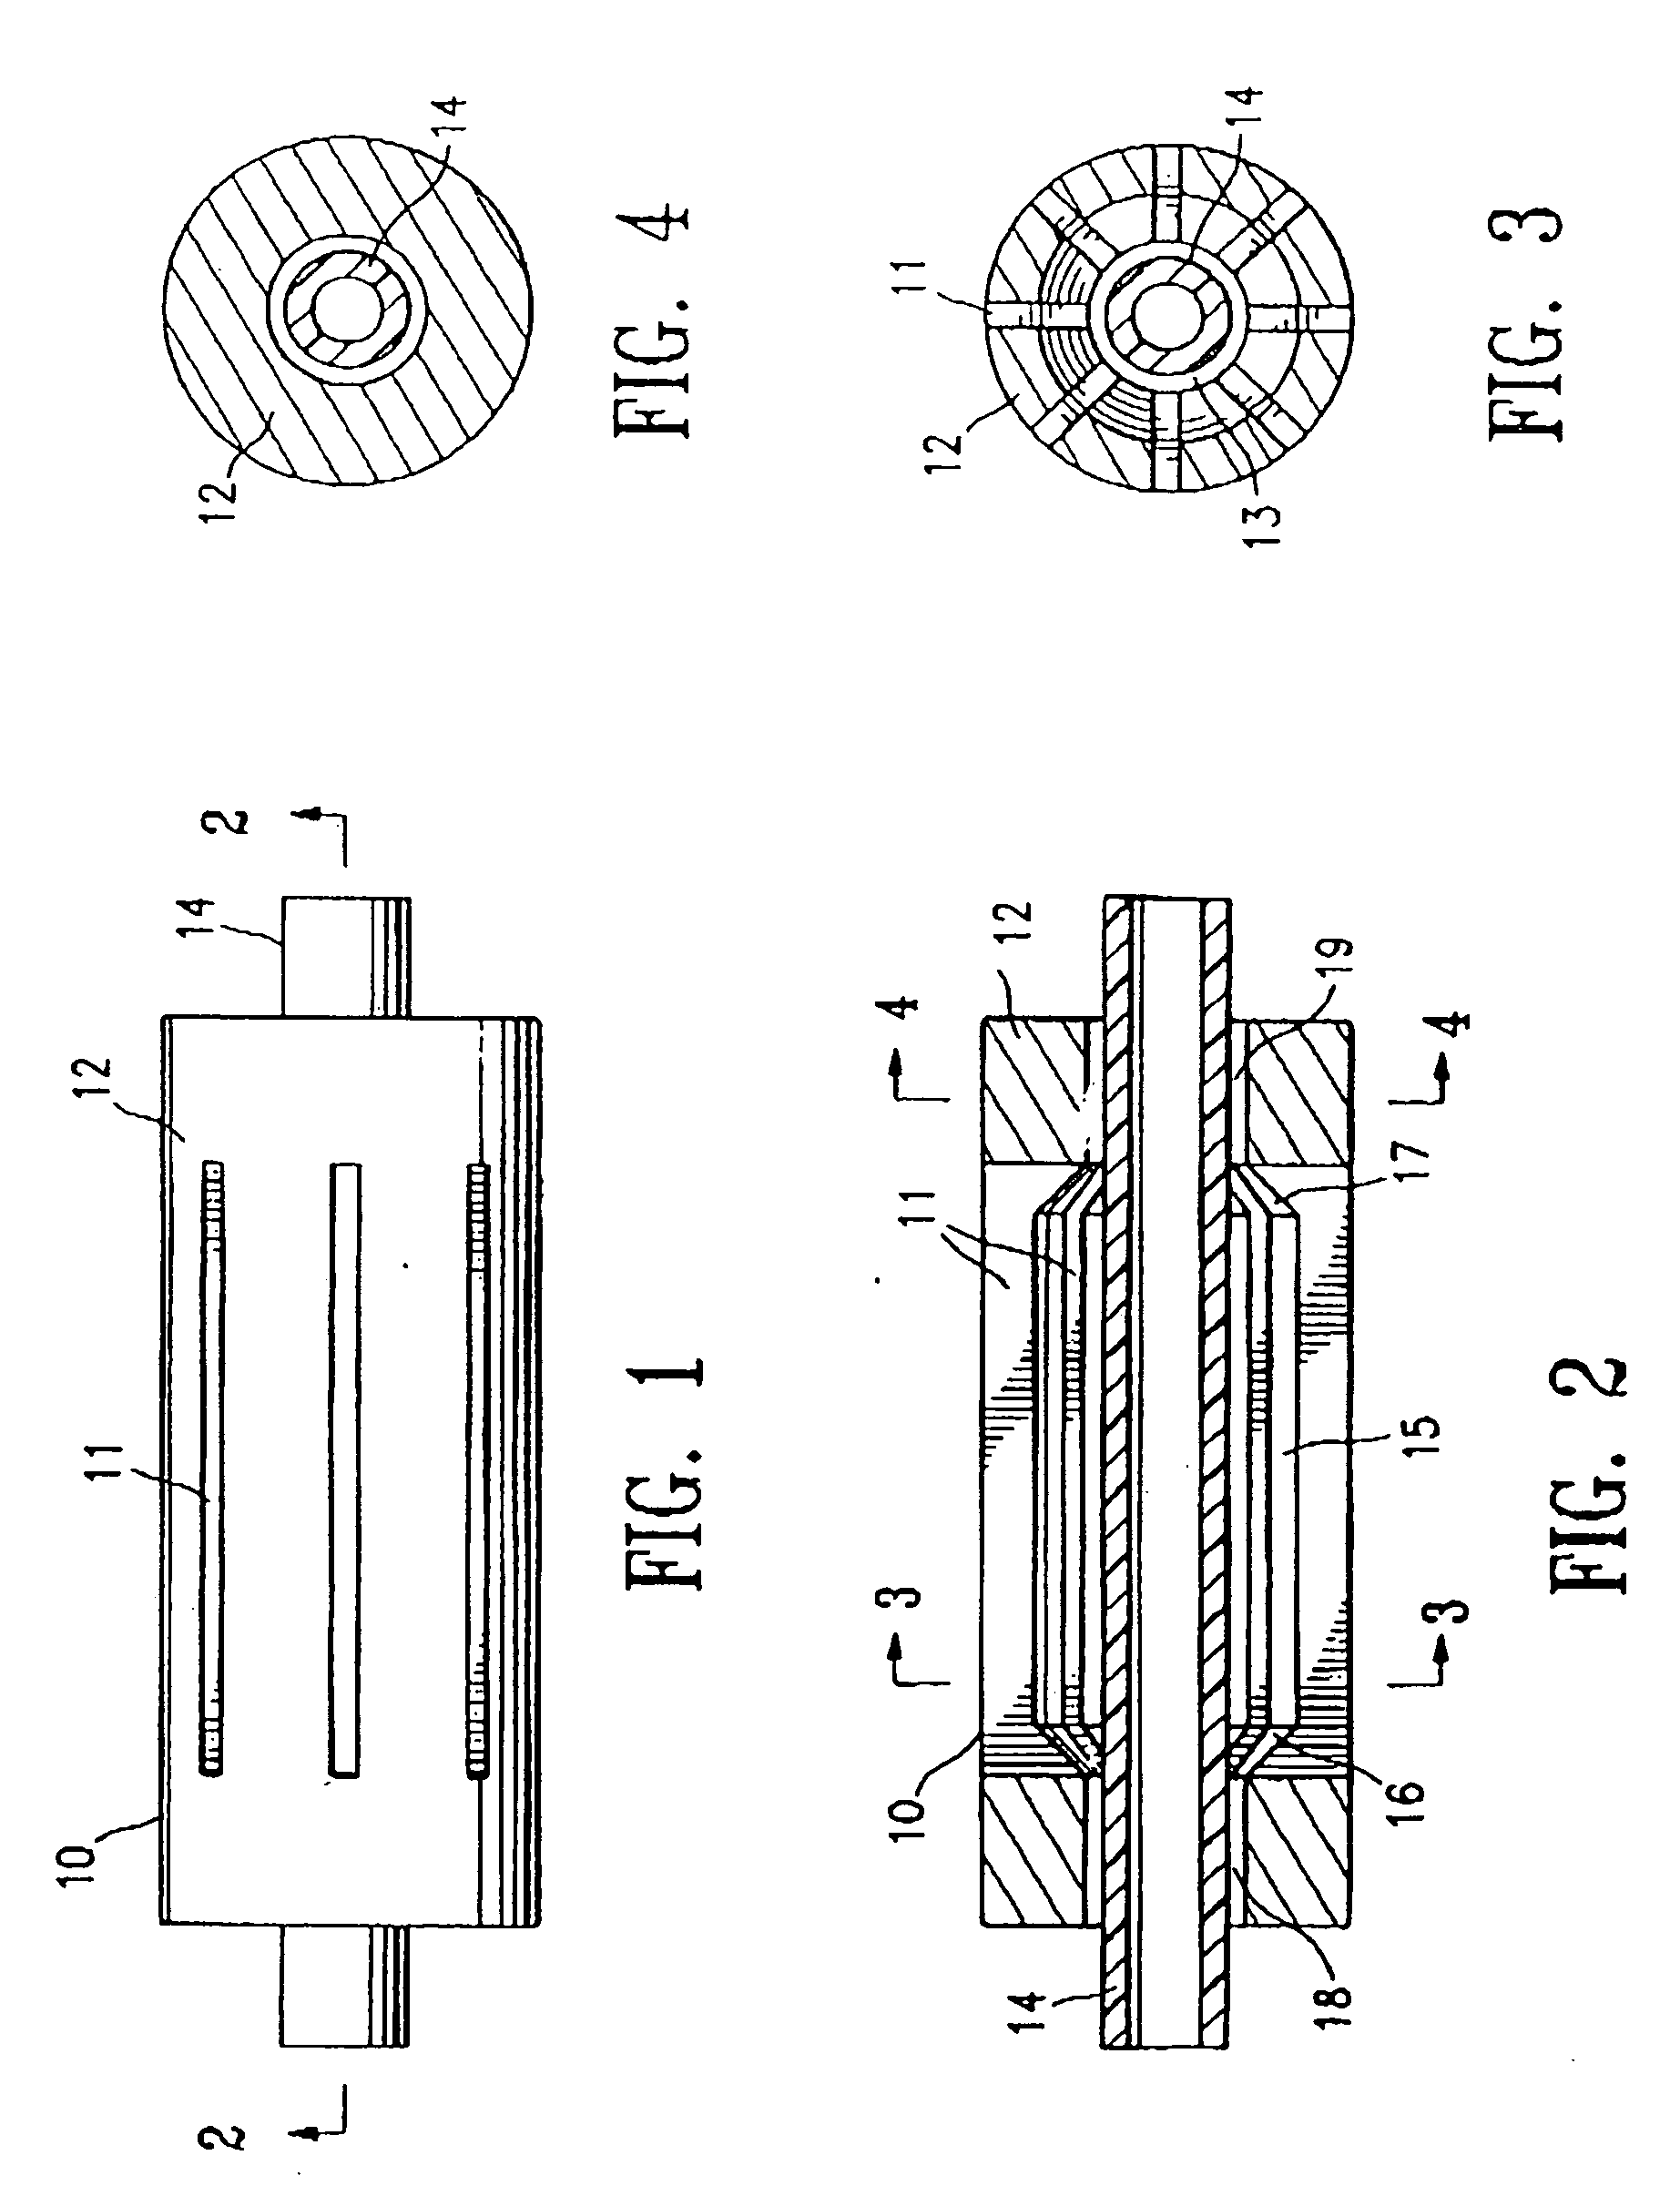 Slotted mold for making a balloon catheter